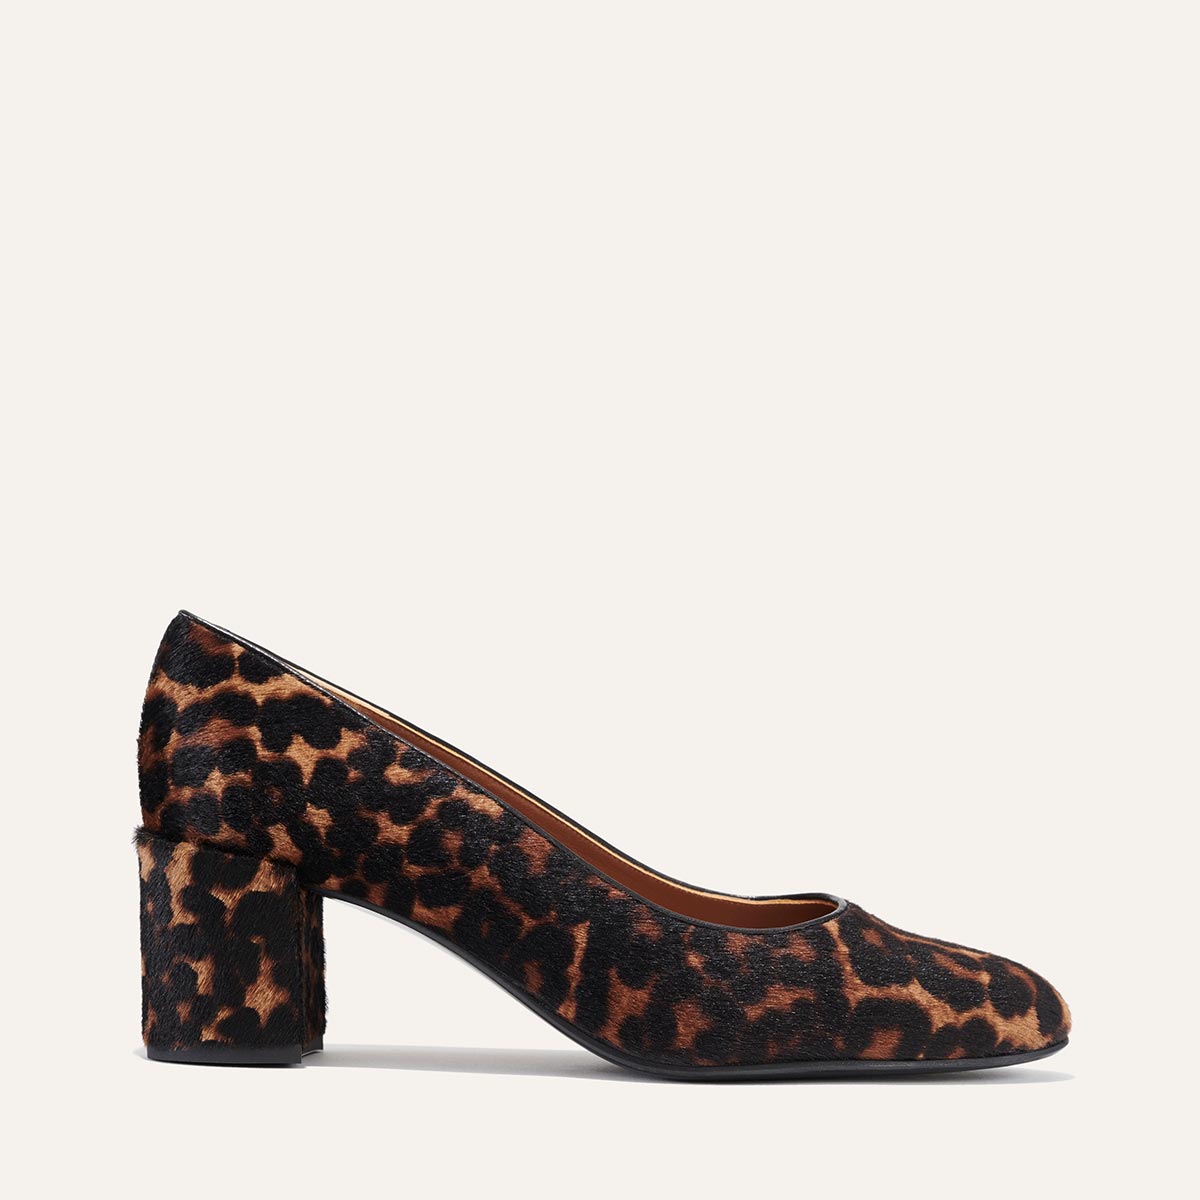 Margaux's classic and comfortable workwear Heel, made in Spain from leopard-print Italian haircalf